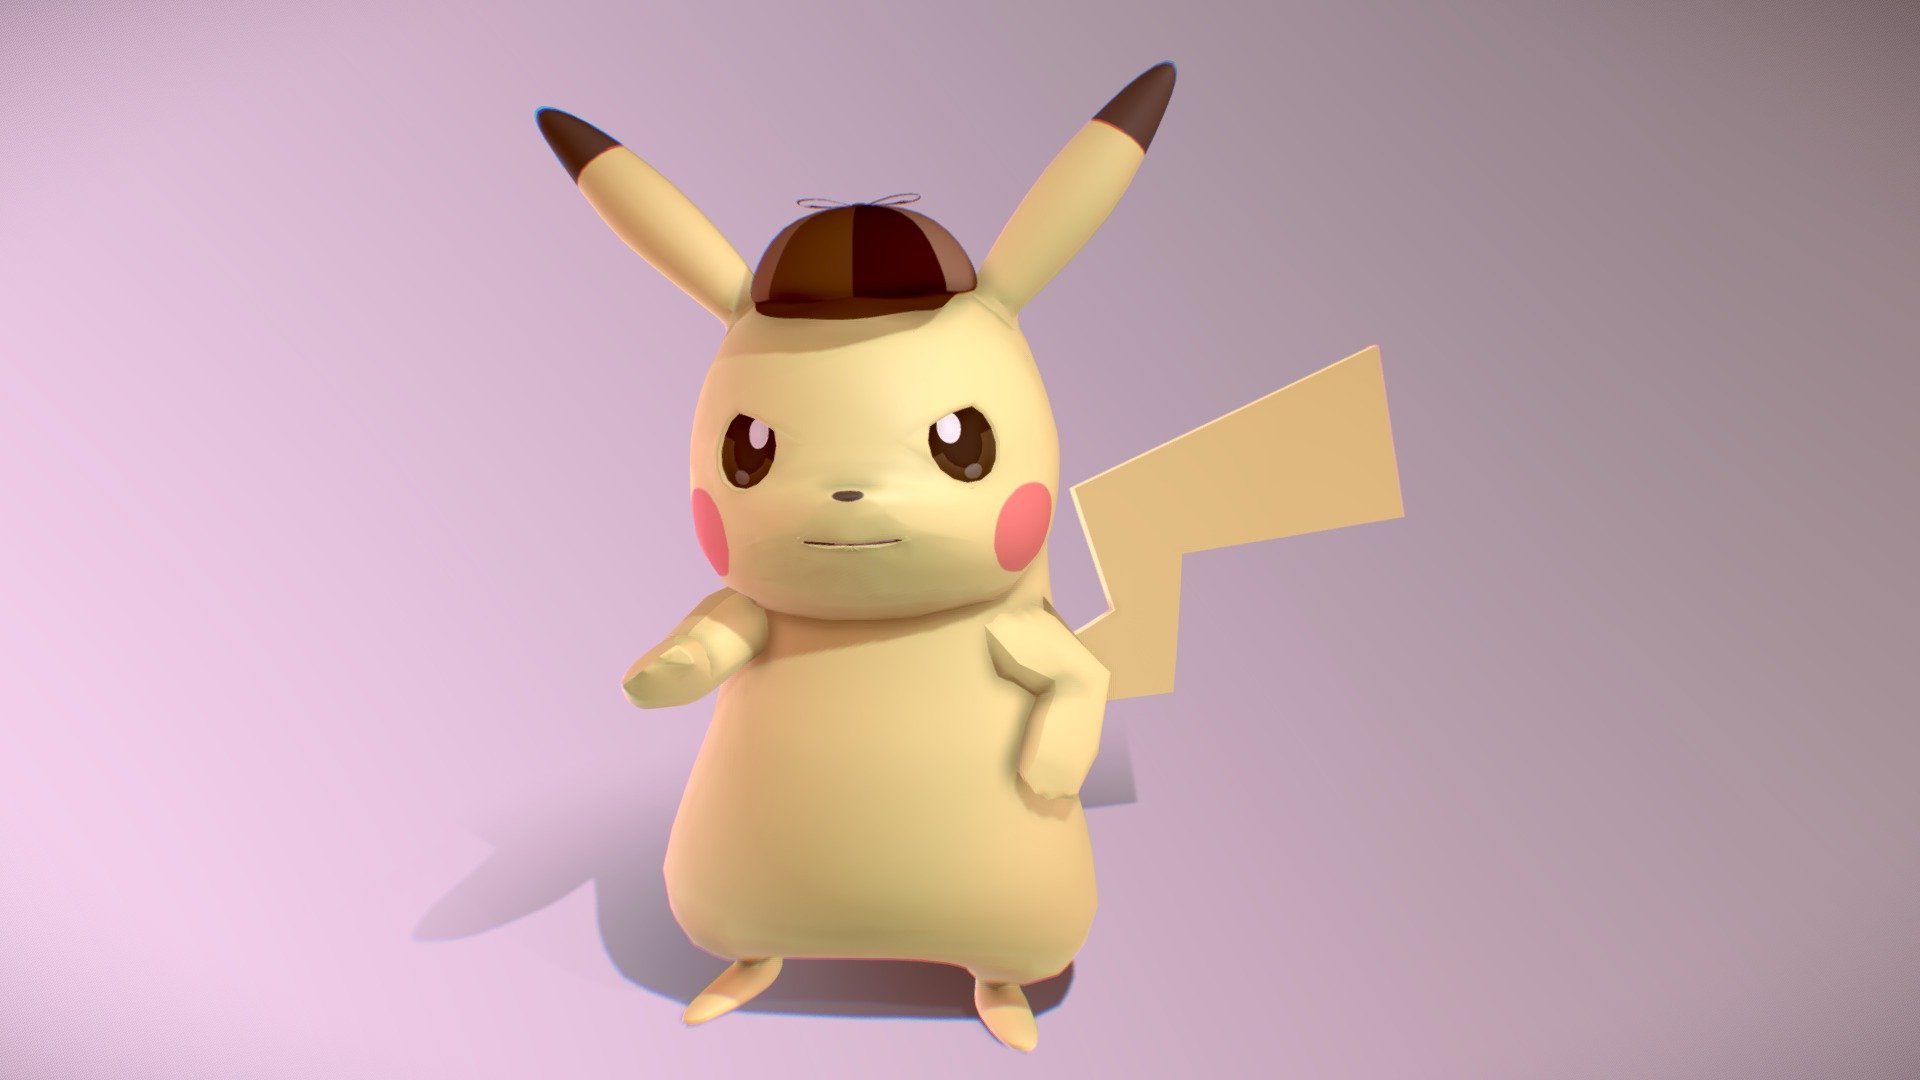 I made it as a hobby.
Movies and games in good!
Even so, it is hard to make Pikachu in 3D.

趣味で作りました。
映画もゲームもどっちも良かったです！
それにしてもピカチュウを３Dで作るの大変ですね。 - Detective Pikachu - 3D model by k asahi (@asahifac) 3d model